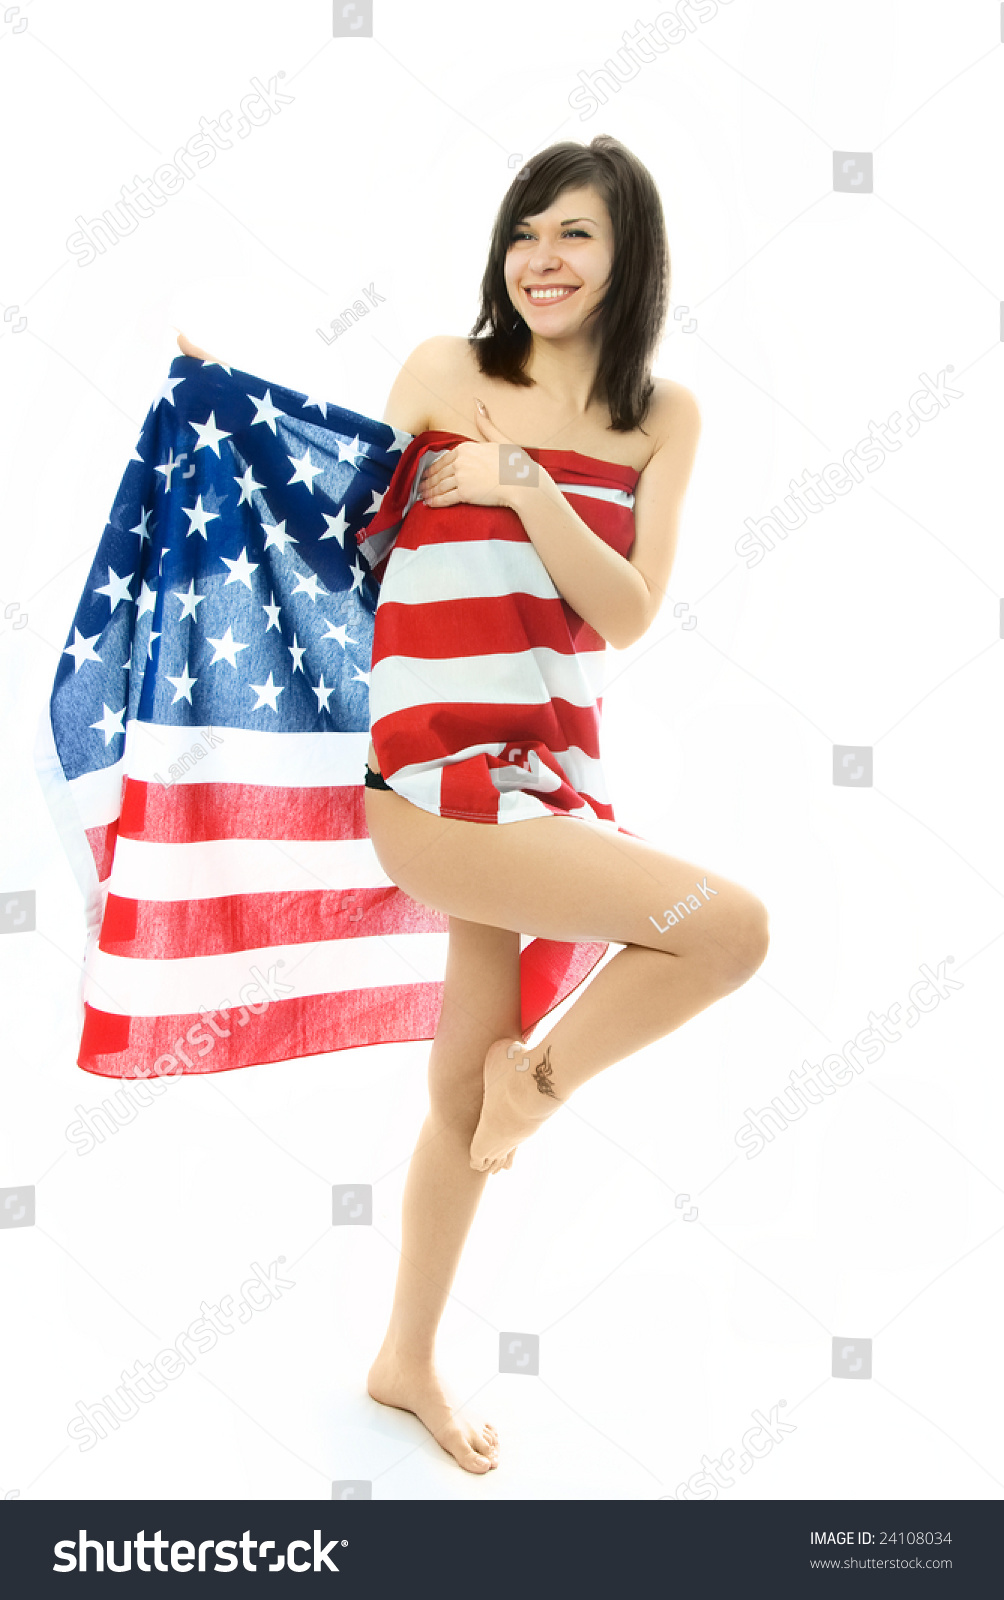 Cheerful Beautiful Nude Woman Wrapped Into Stock Photo Shutterstock